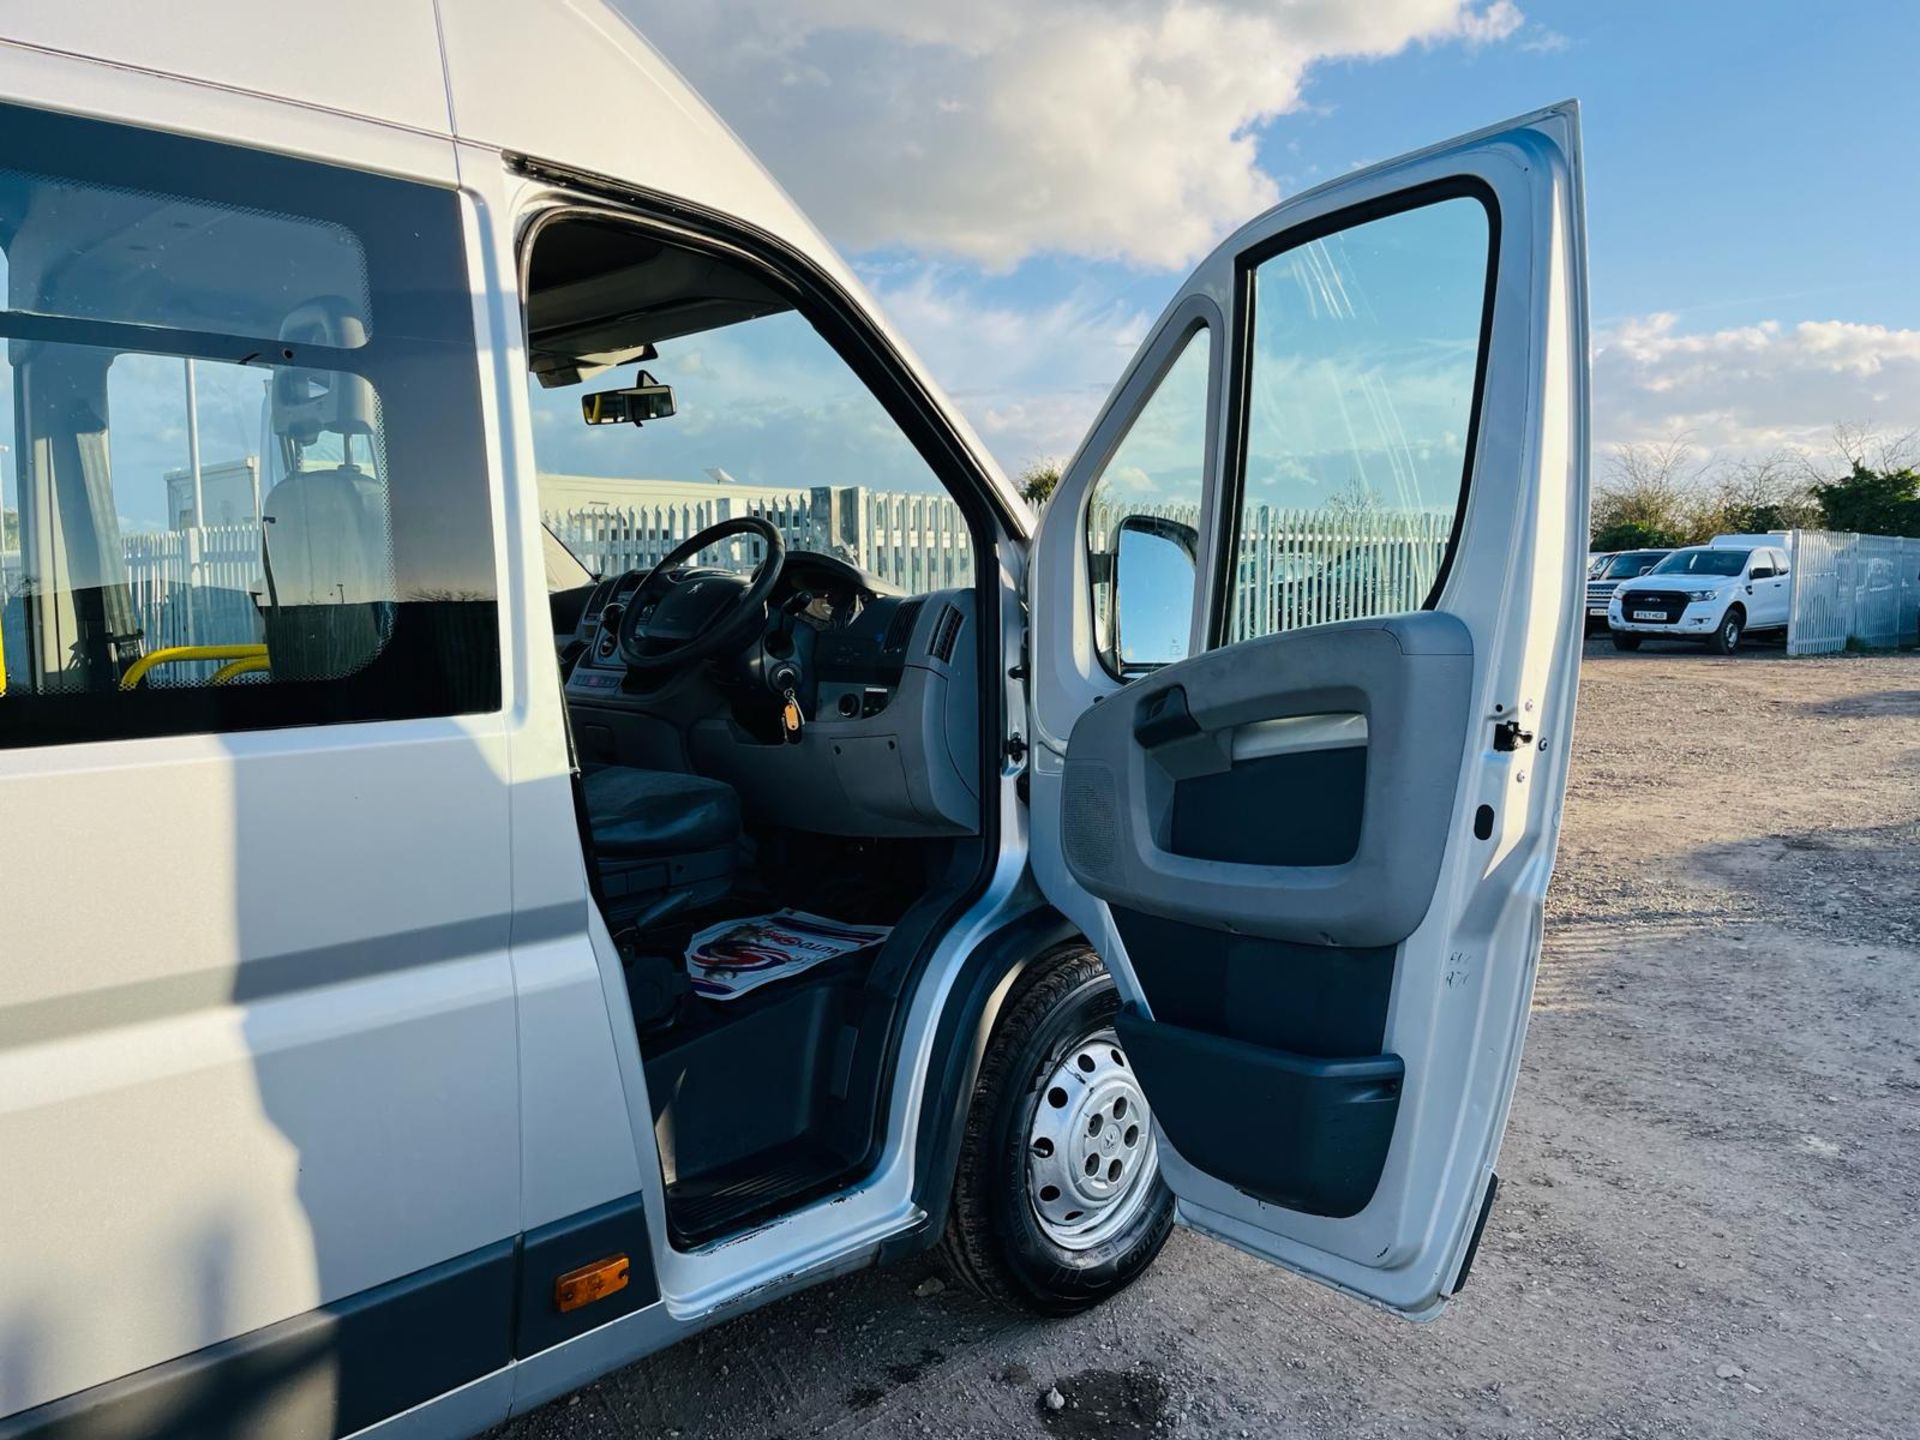 ** ON SALE ** Peugeot Boxer 435 2.0 HDI Minibus L4 H2 2011'11 Reg' -1 Former Keeper-Extra Long Wheel - Image 17 of 31